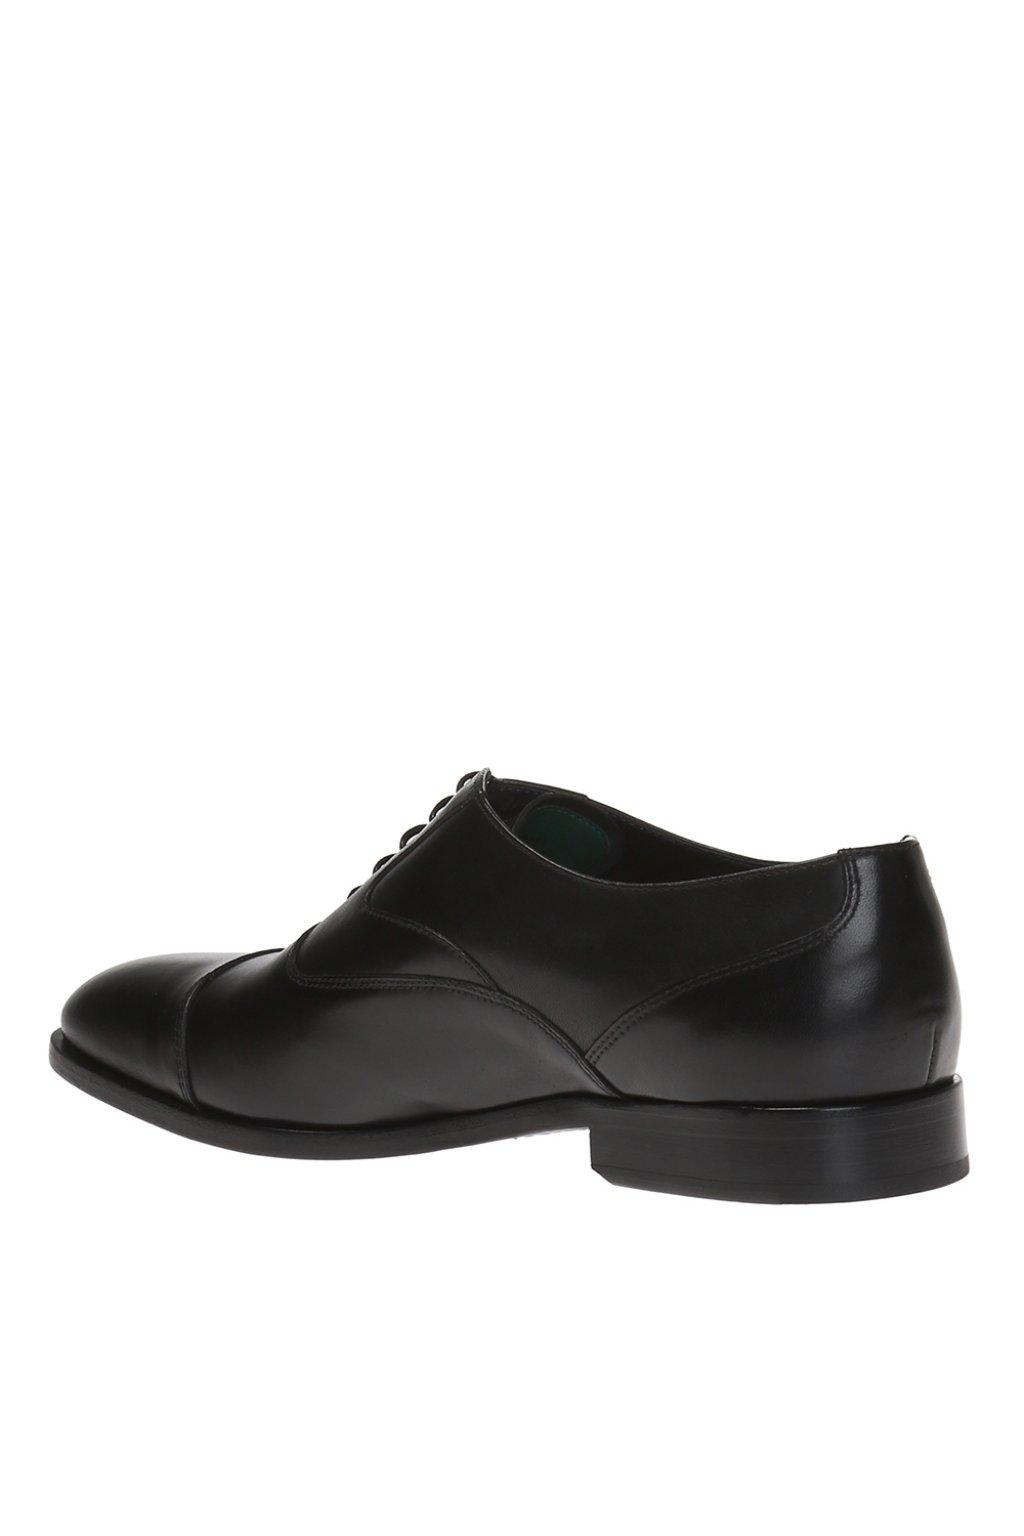 PS by Paul Smith 'tompkins' Oxford Shoes in Black for Men | Lyst